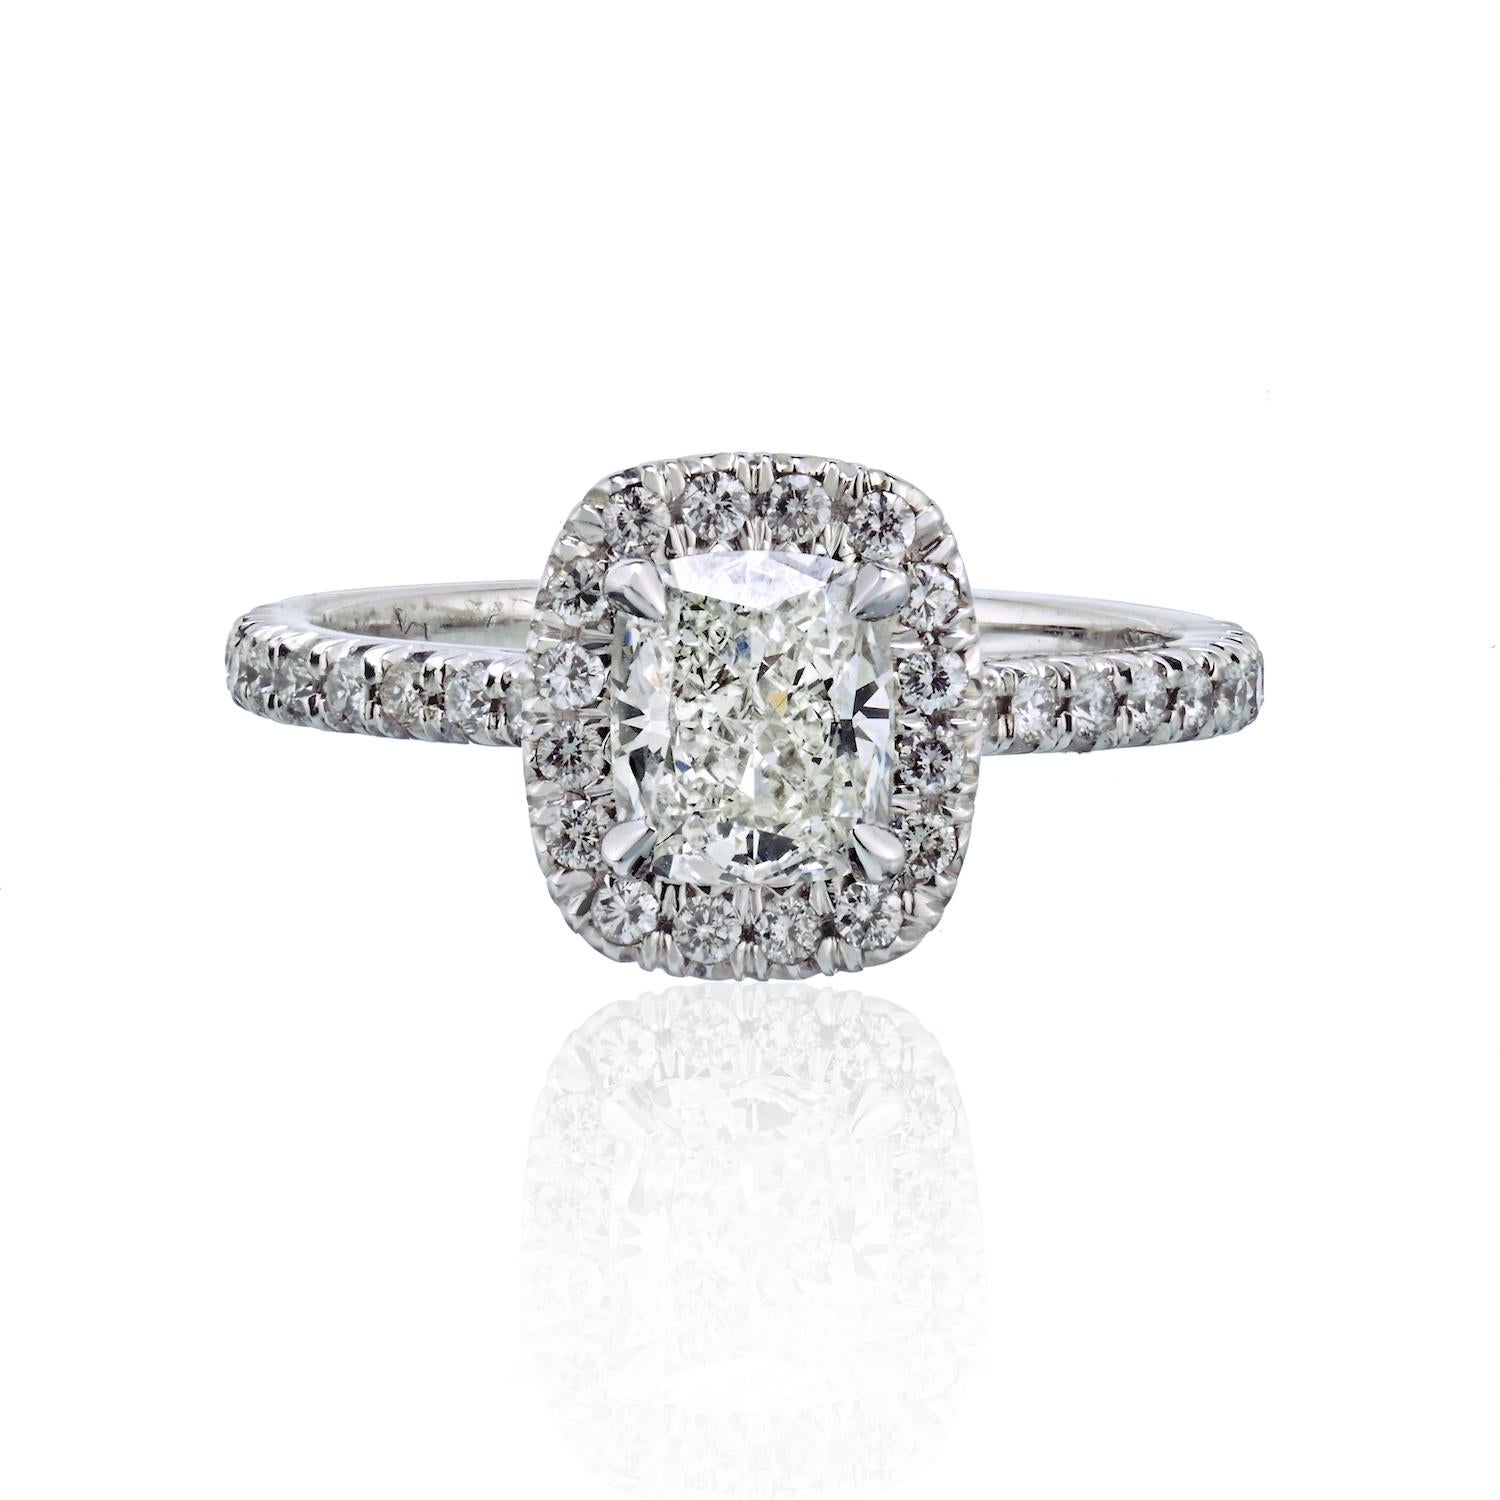 This lovely cushion cut halo set diamond engagement ring features a 1.06-carat center diamond in a sparkly round brilliant diamond setting. Round cuts set around the center stone and along the ring's shank. Four prongs securely hold the center